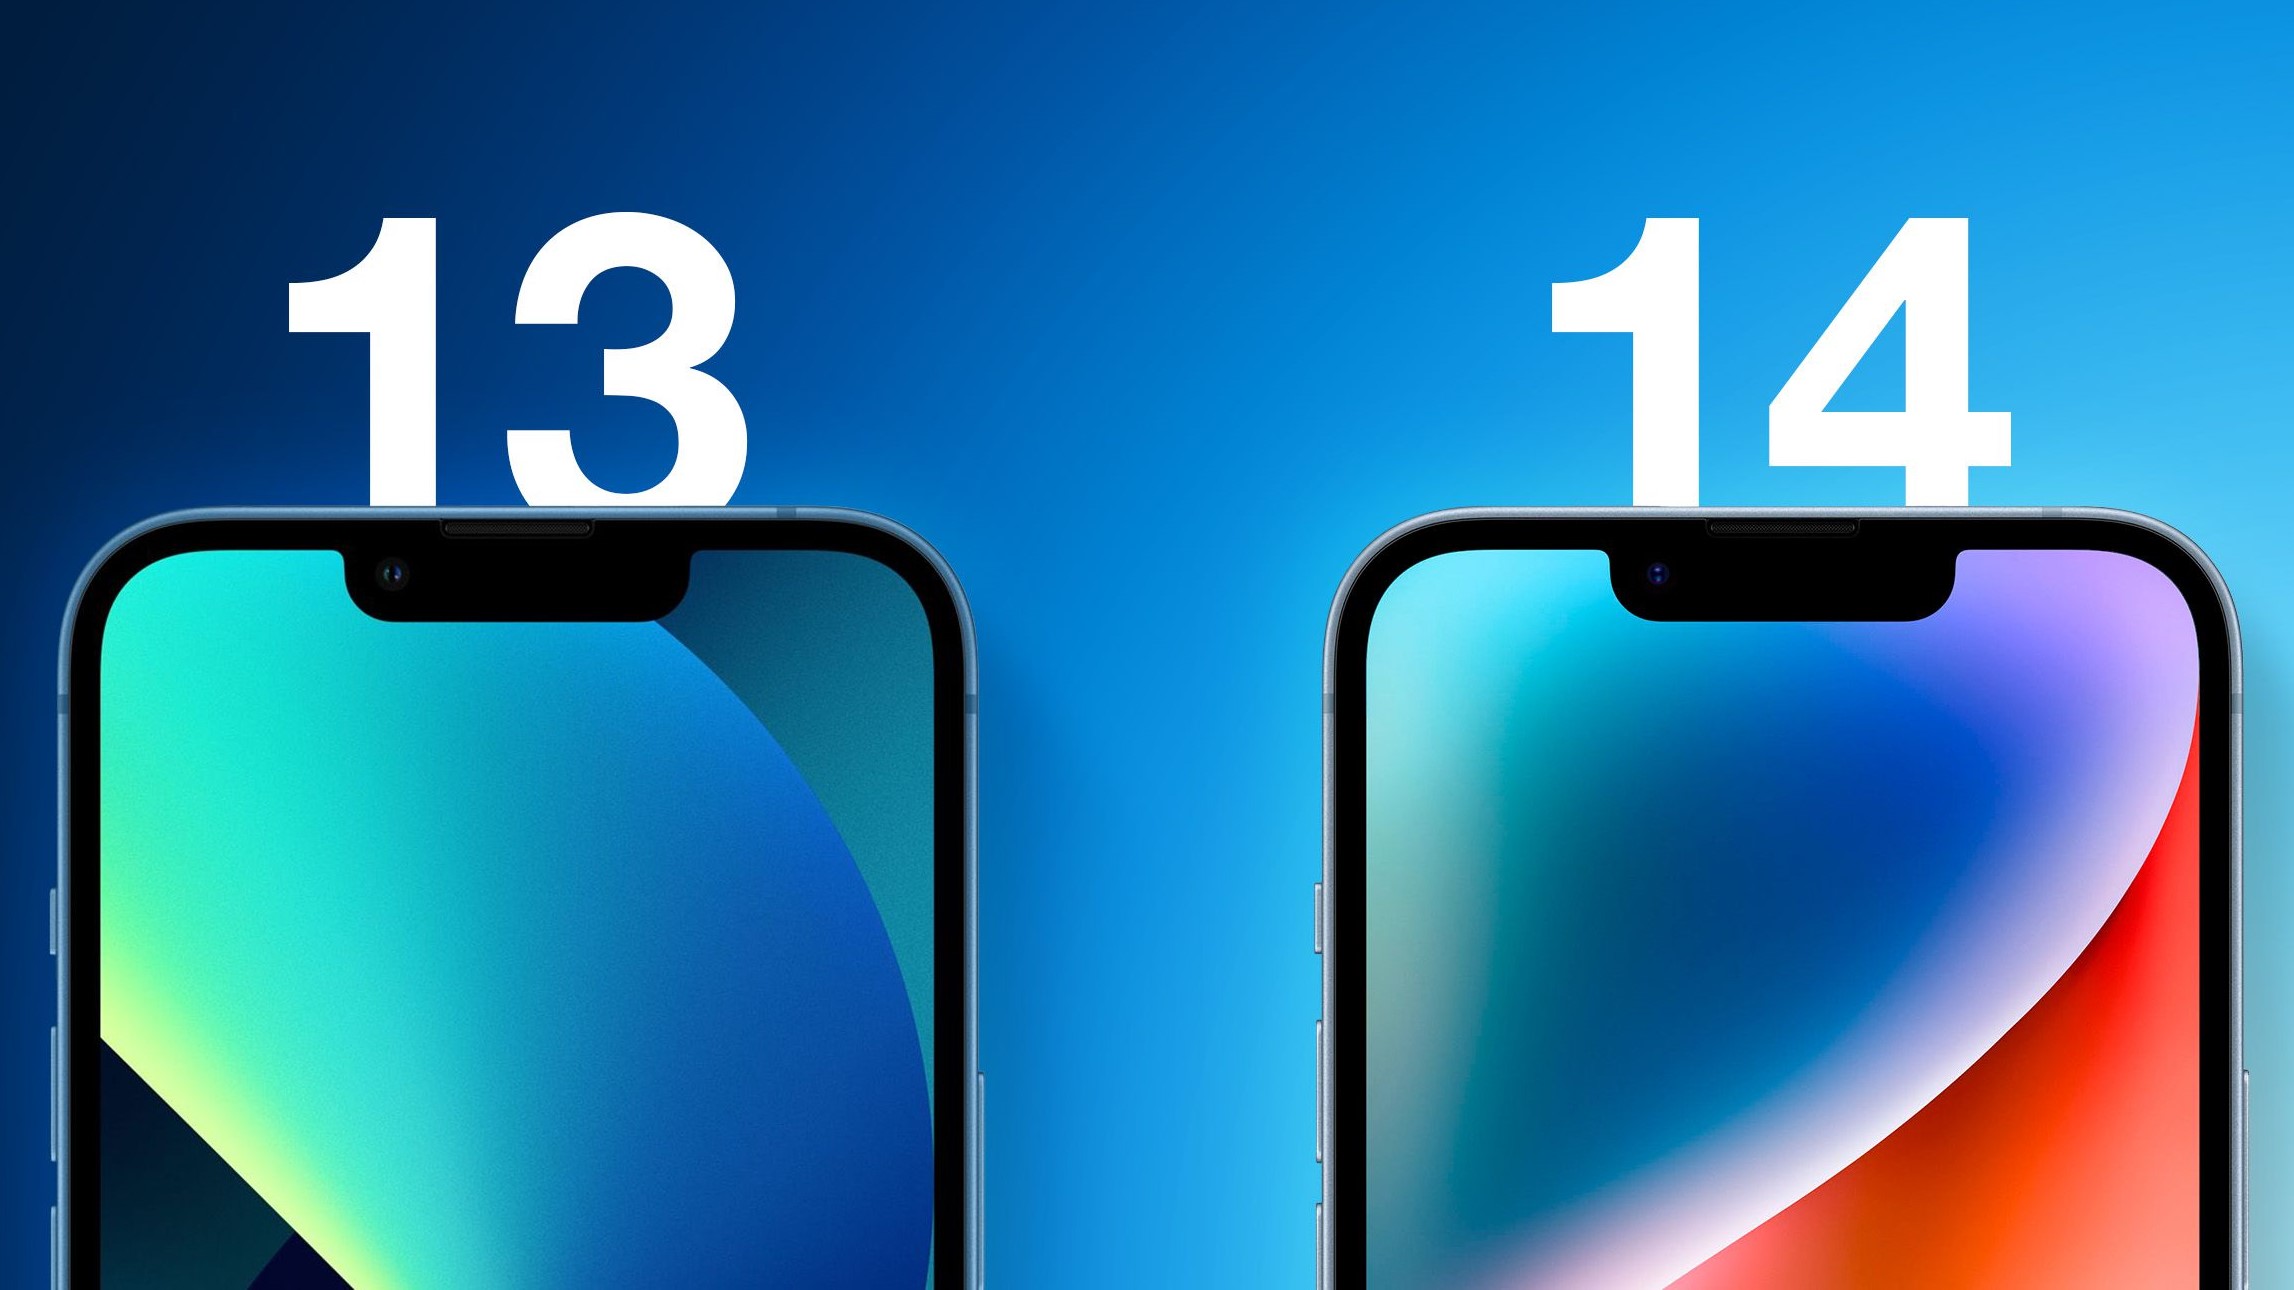 model-evolution-comparing-iphone-14-and-iphone-13